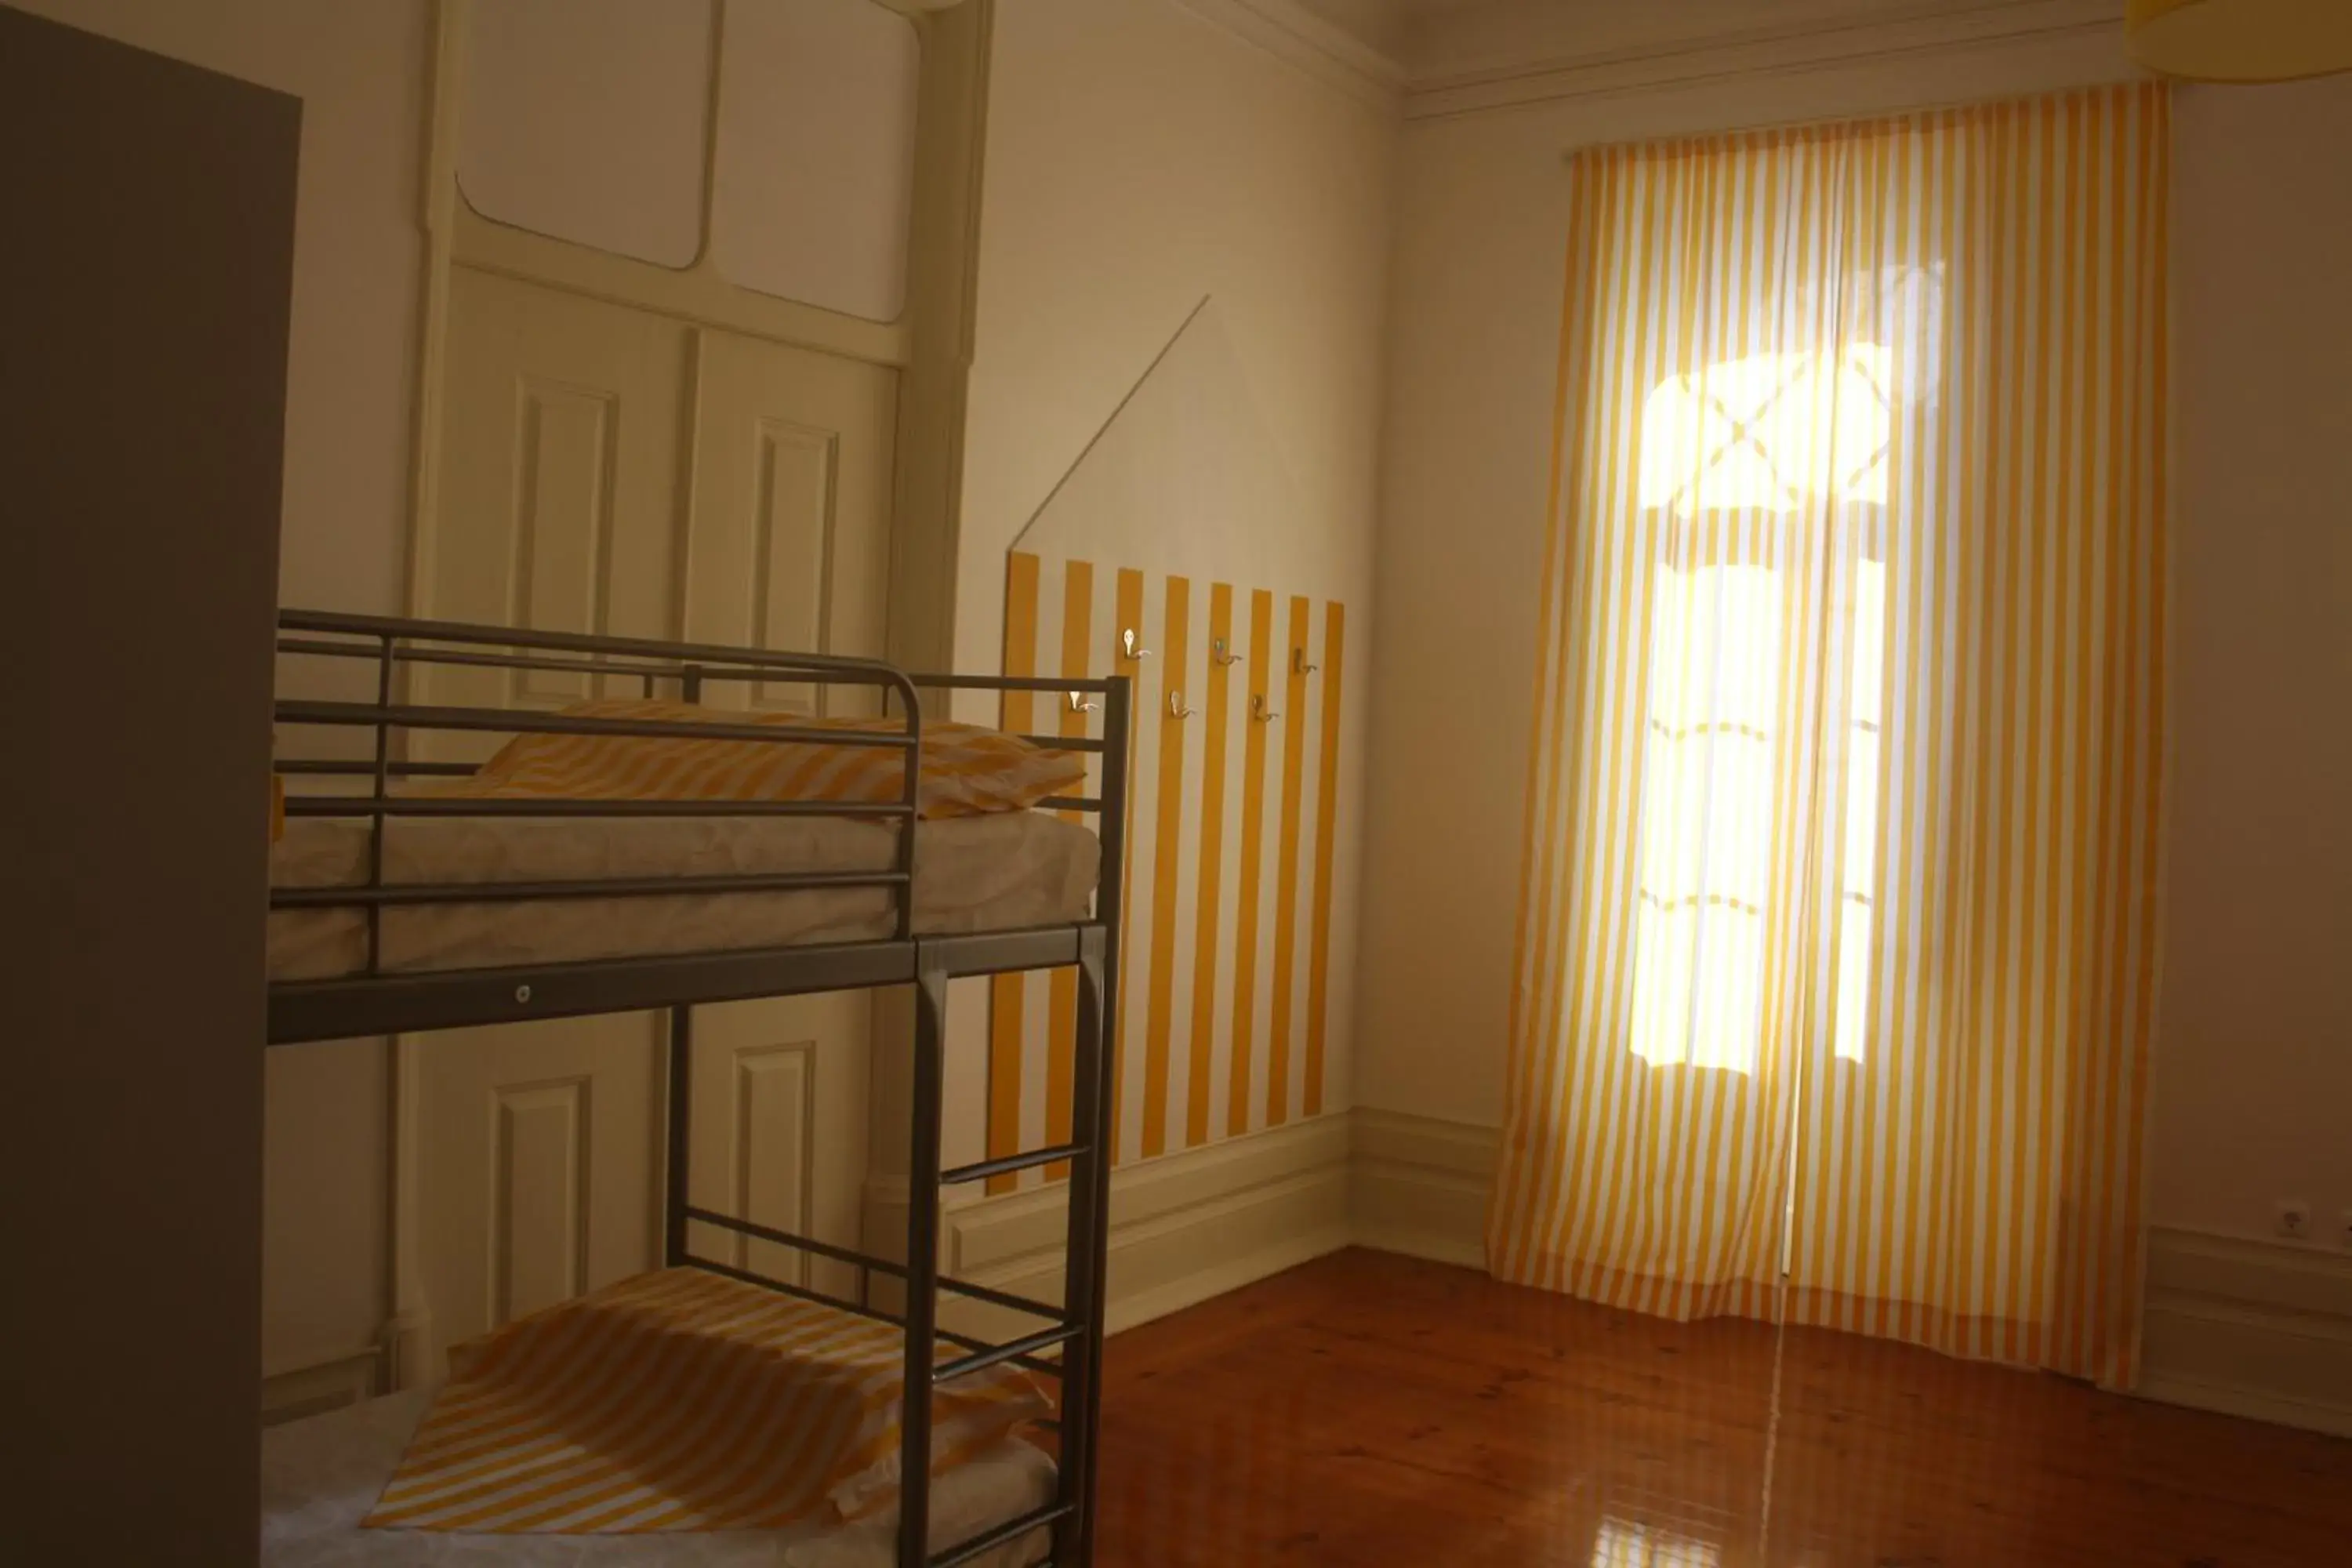 6-Bed Mixed Dormitory Room - single occupancy in Hostel 402